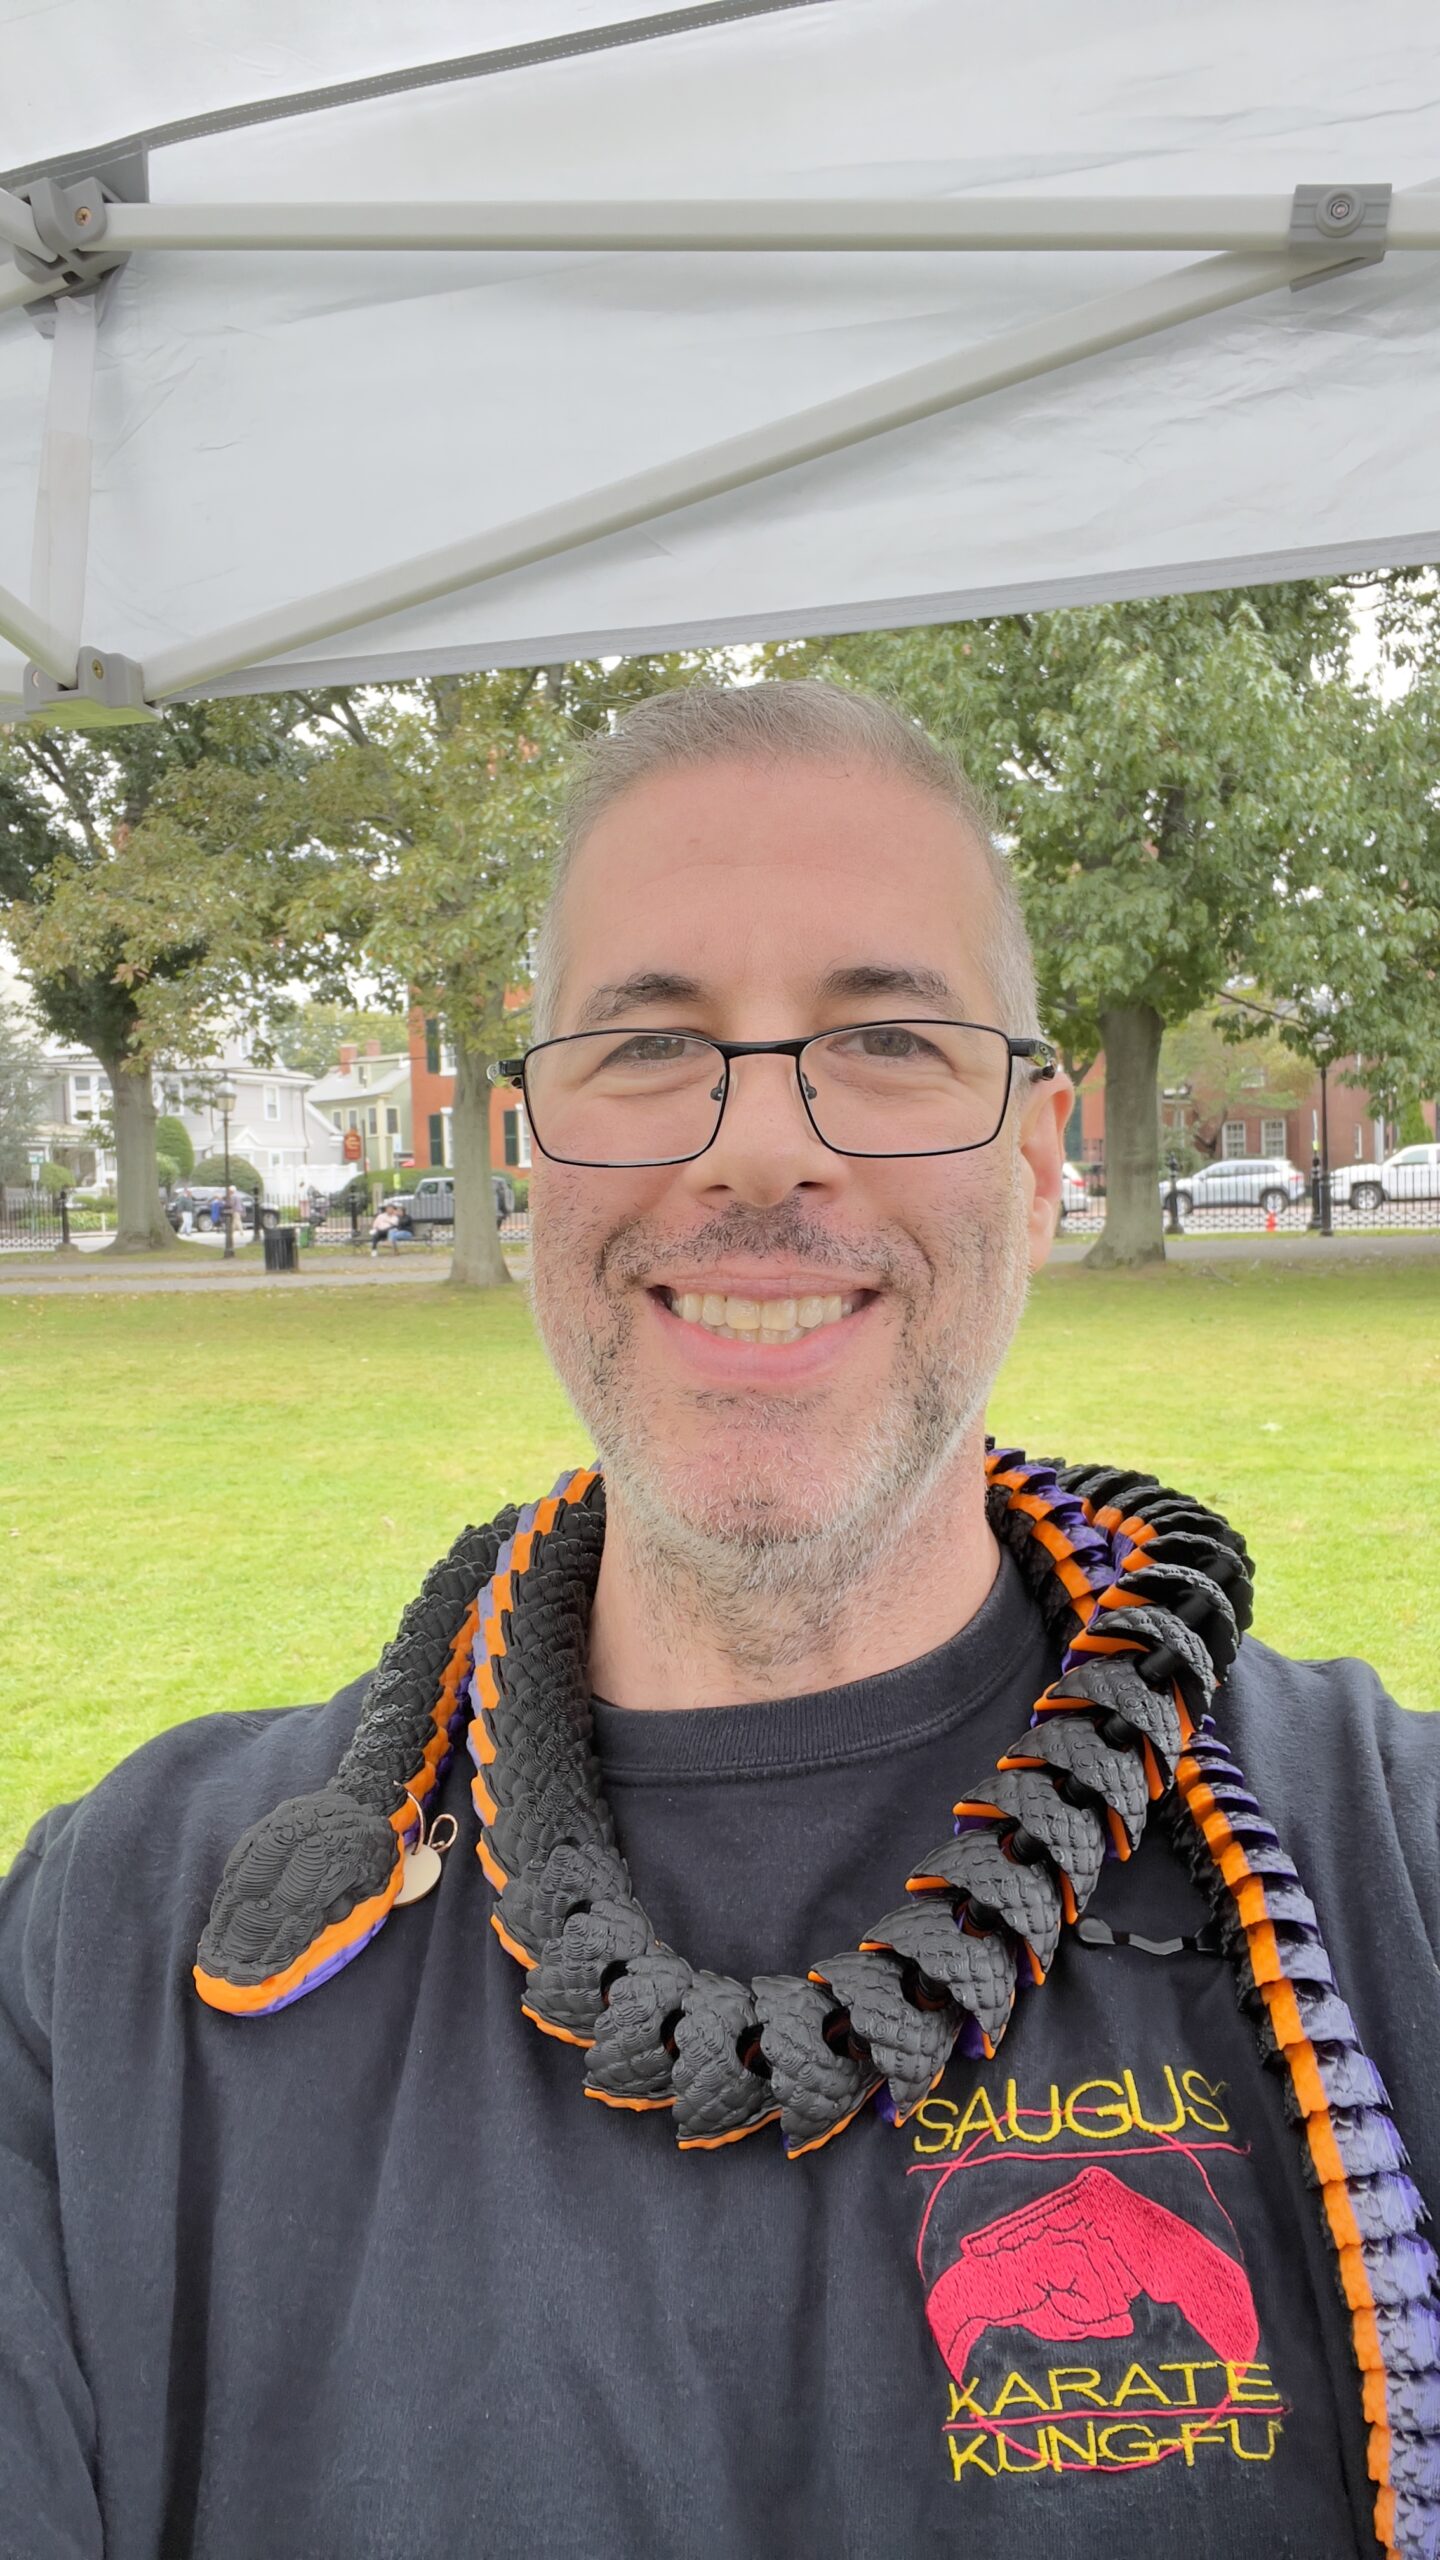 Member Spotlight: Thistle Art - Picture a radiant man with glasses, proudly wearing his martial arts inspired t-shirt. He dons a ceremonial rope around his neck, adding an attractive touch to his outfit. All this while standing outdoors under a pristine white canopy.